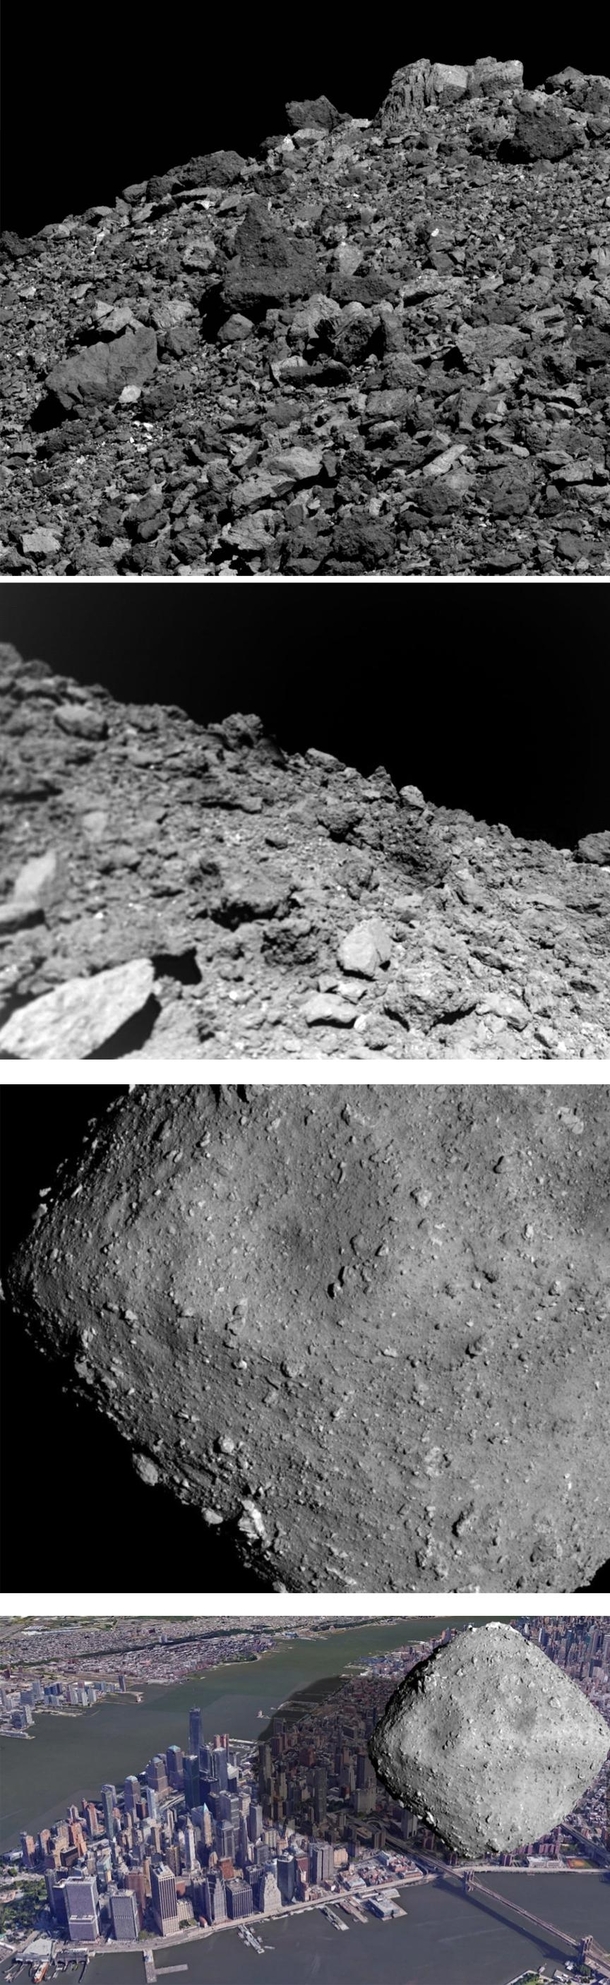 Nasa has a spacecraft called OSIRIS-REx at Asteroid Bennu which will return a sample of its rocks back to Earth in 